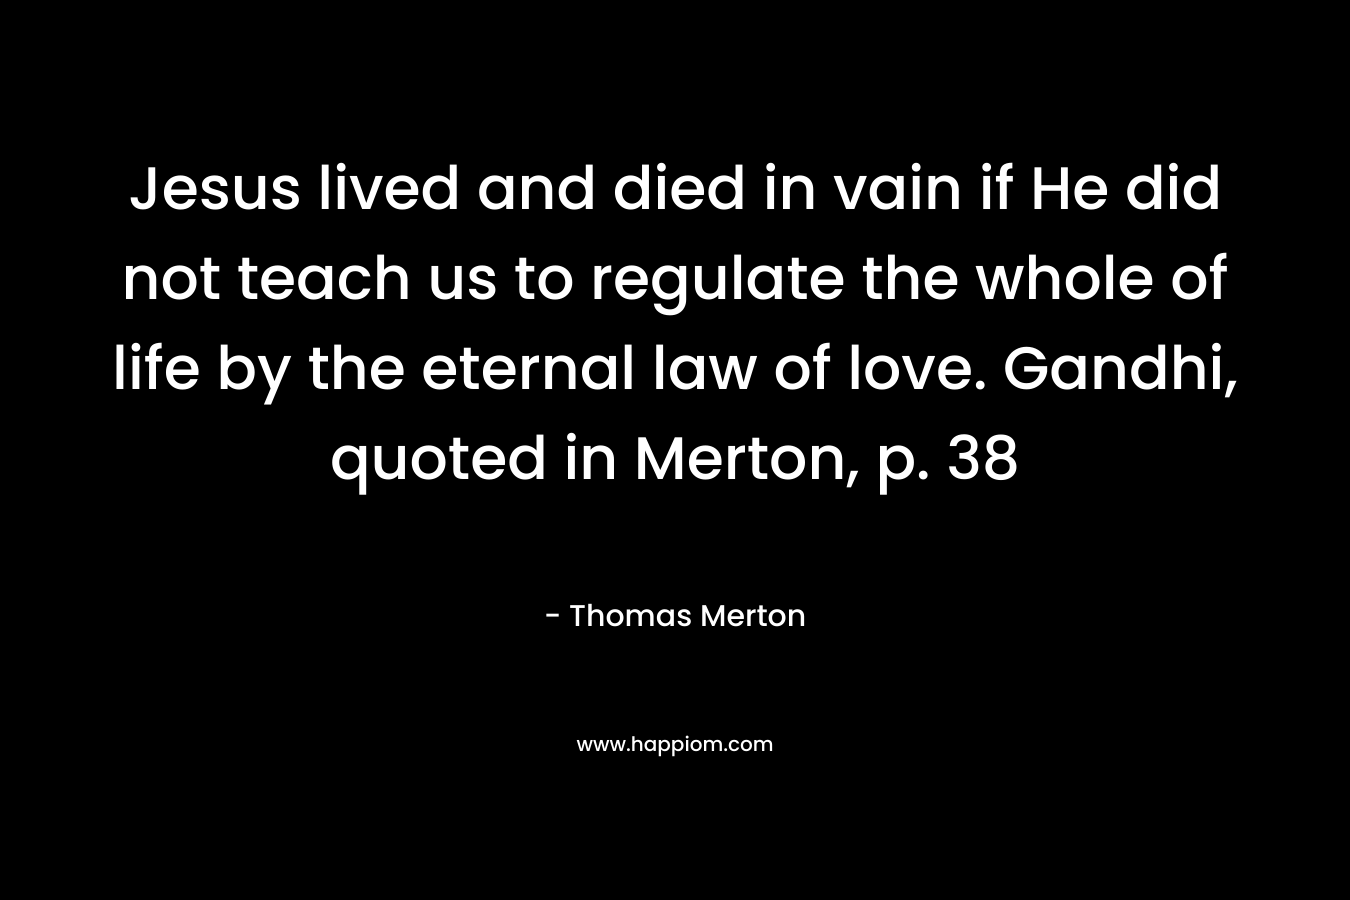 Jesus lived and died in vain if He did not teach us to regulate the whole of life by the eternal law of love. Gandhi, quoted in Merton, p. 38